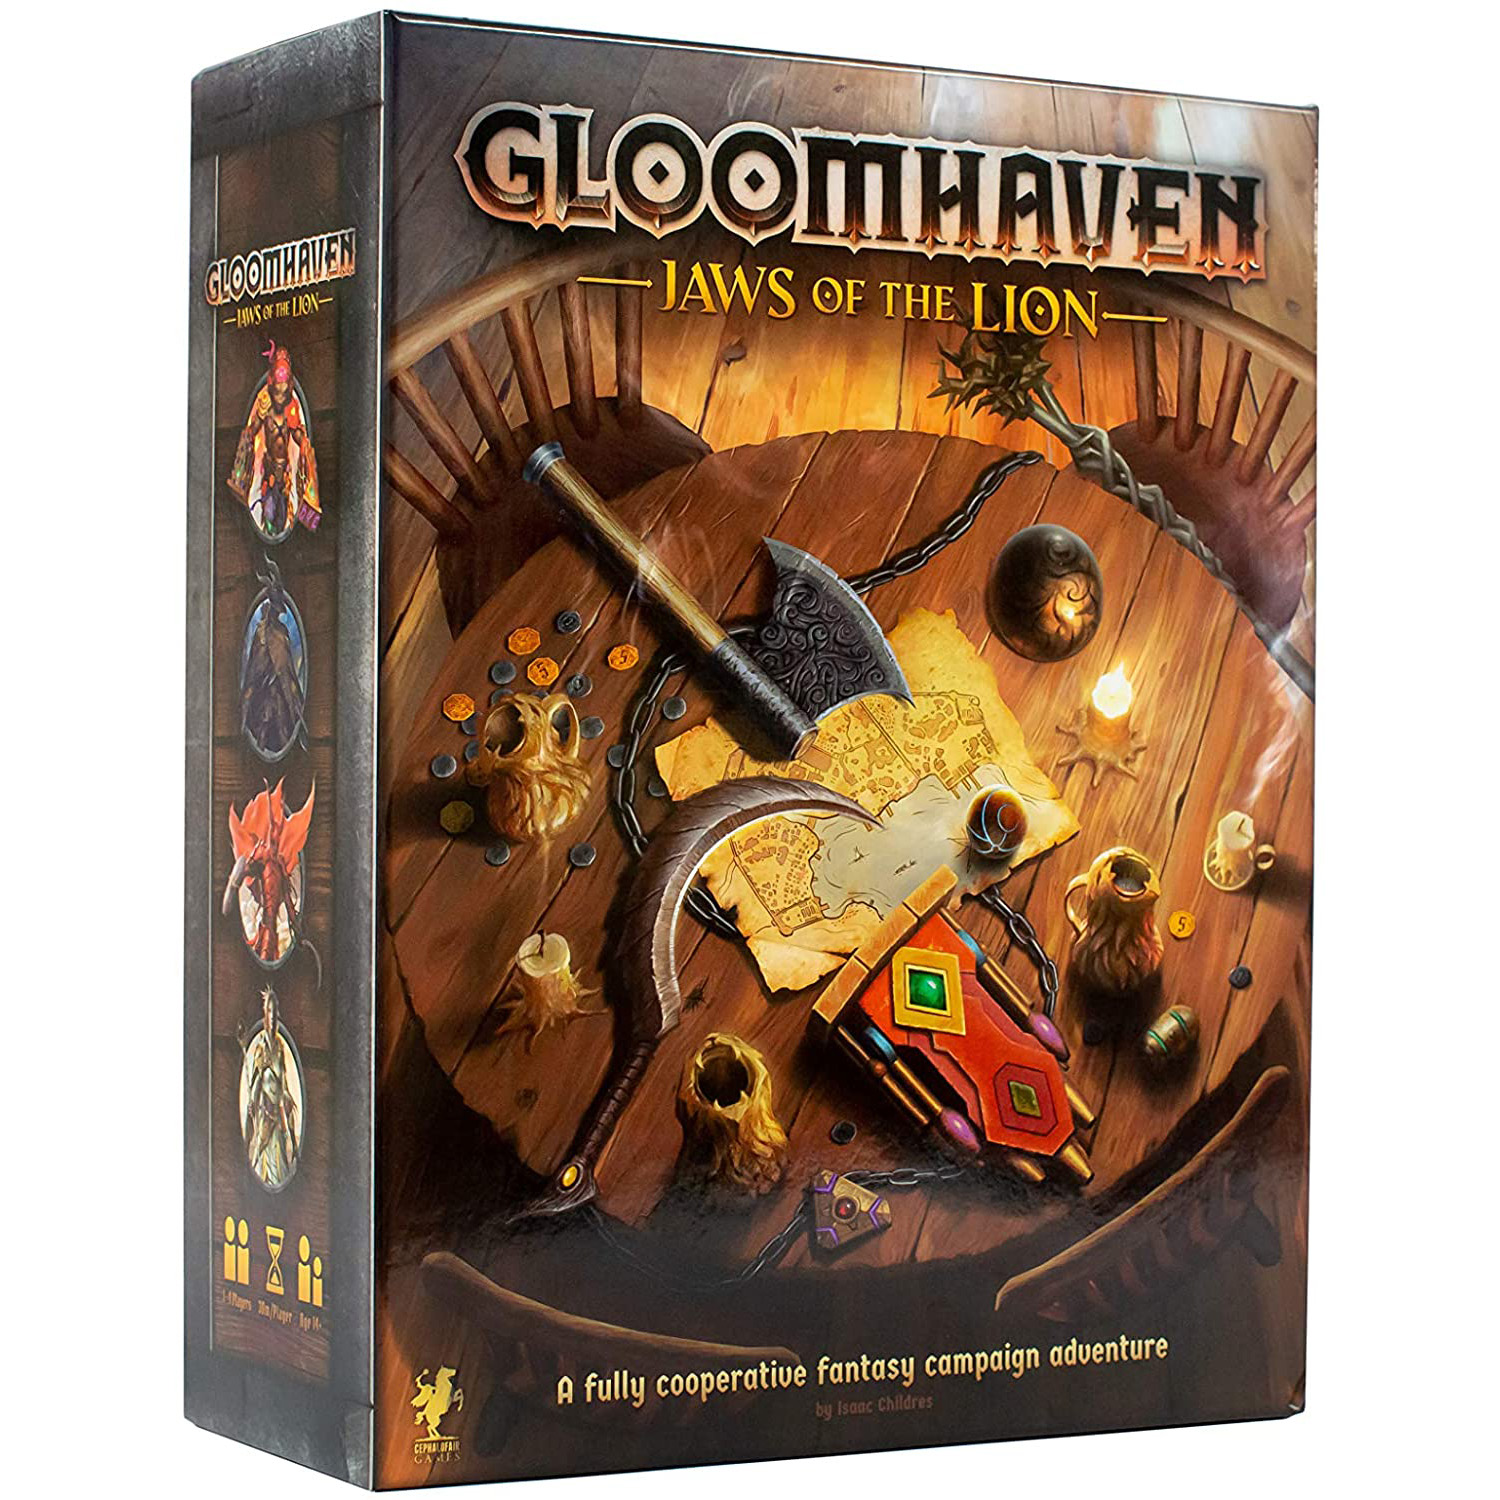 Gloomhaven Jaws Of The Lion at SydeQuest Games